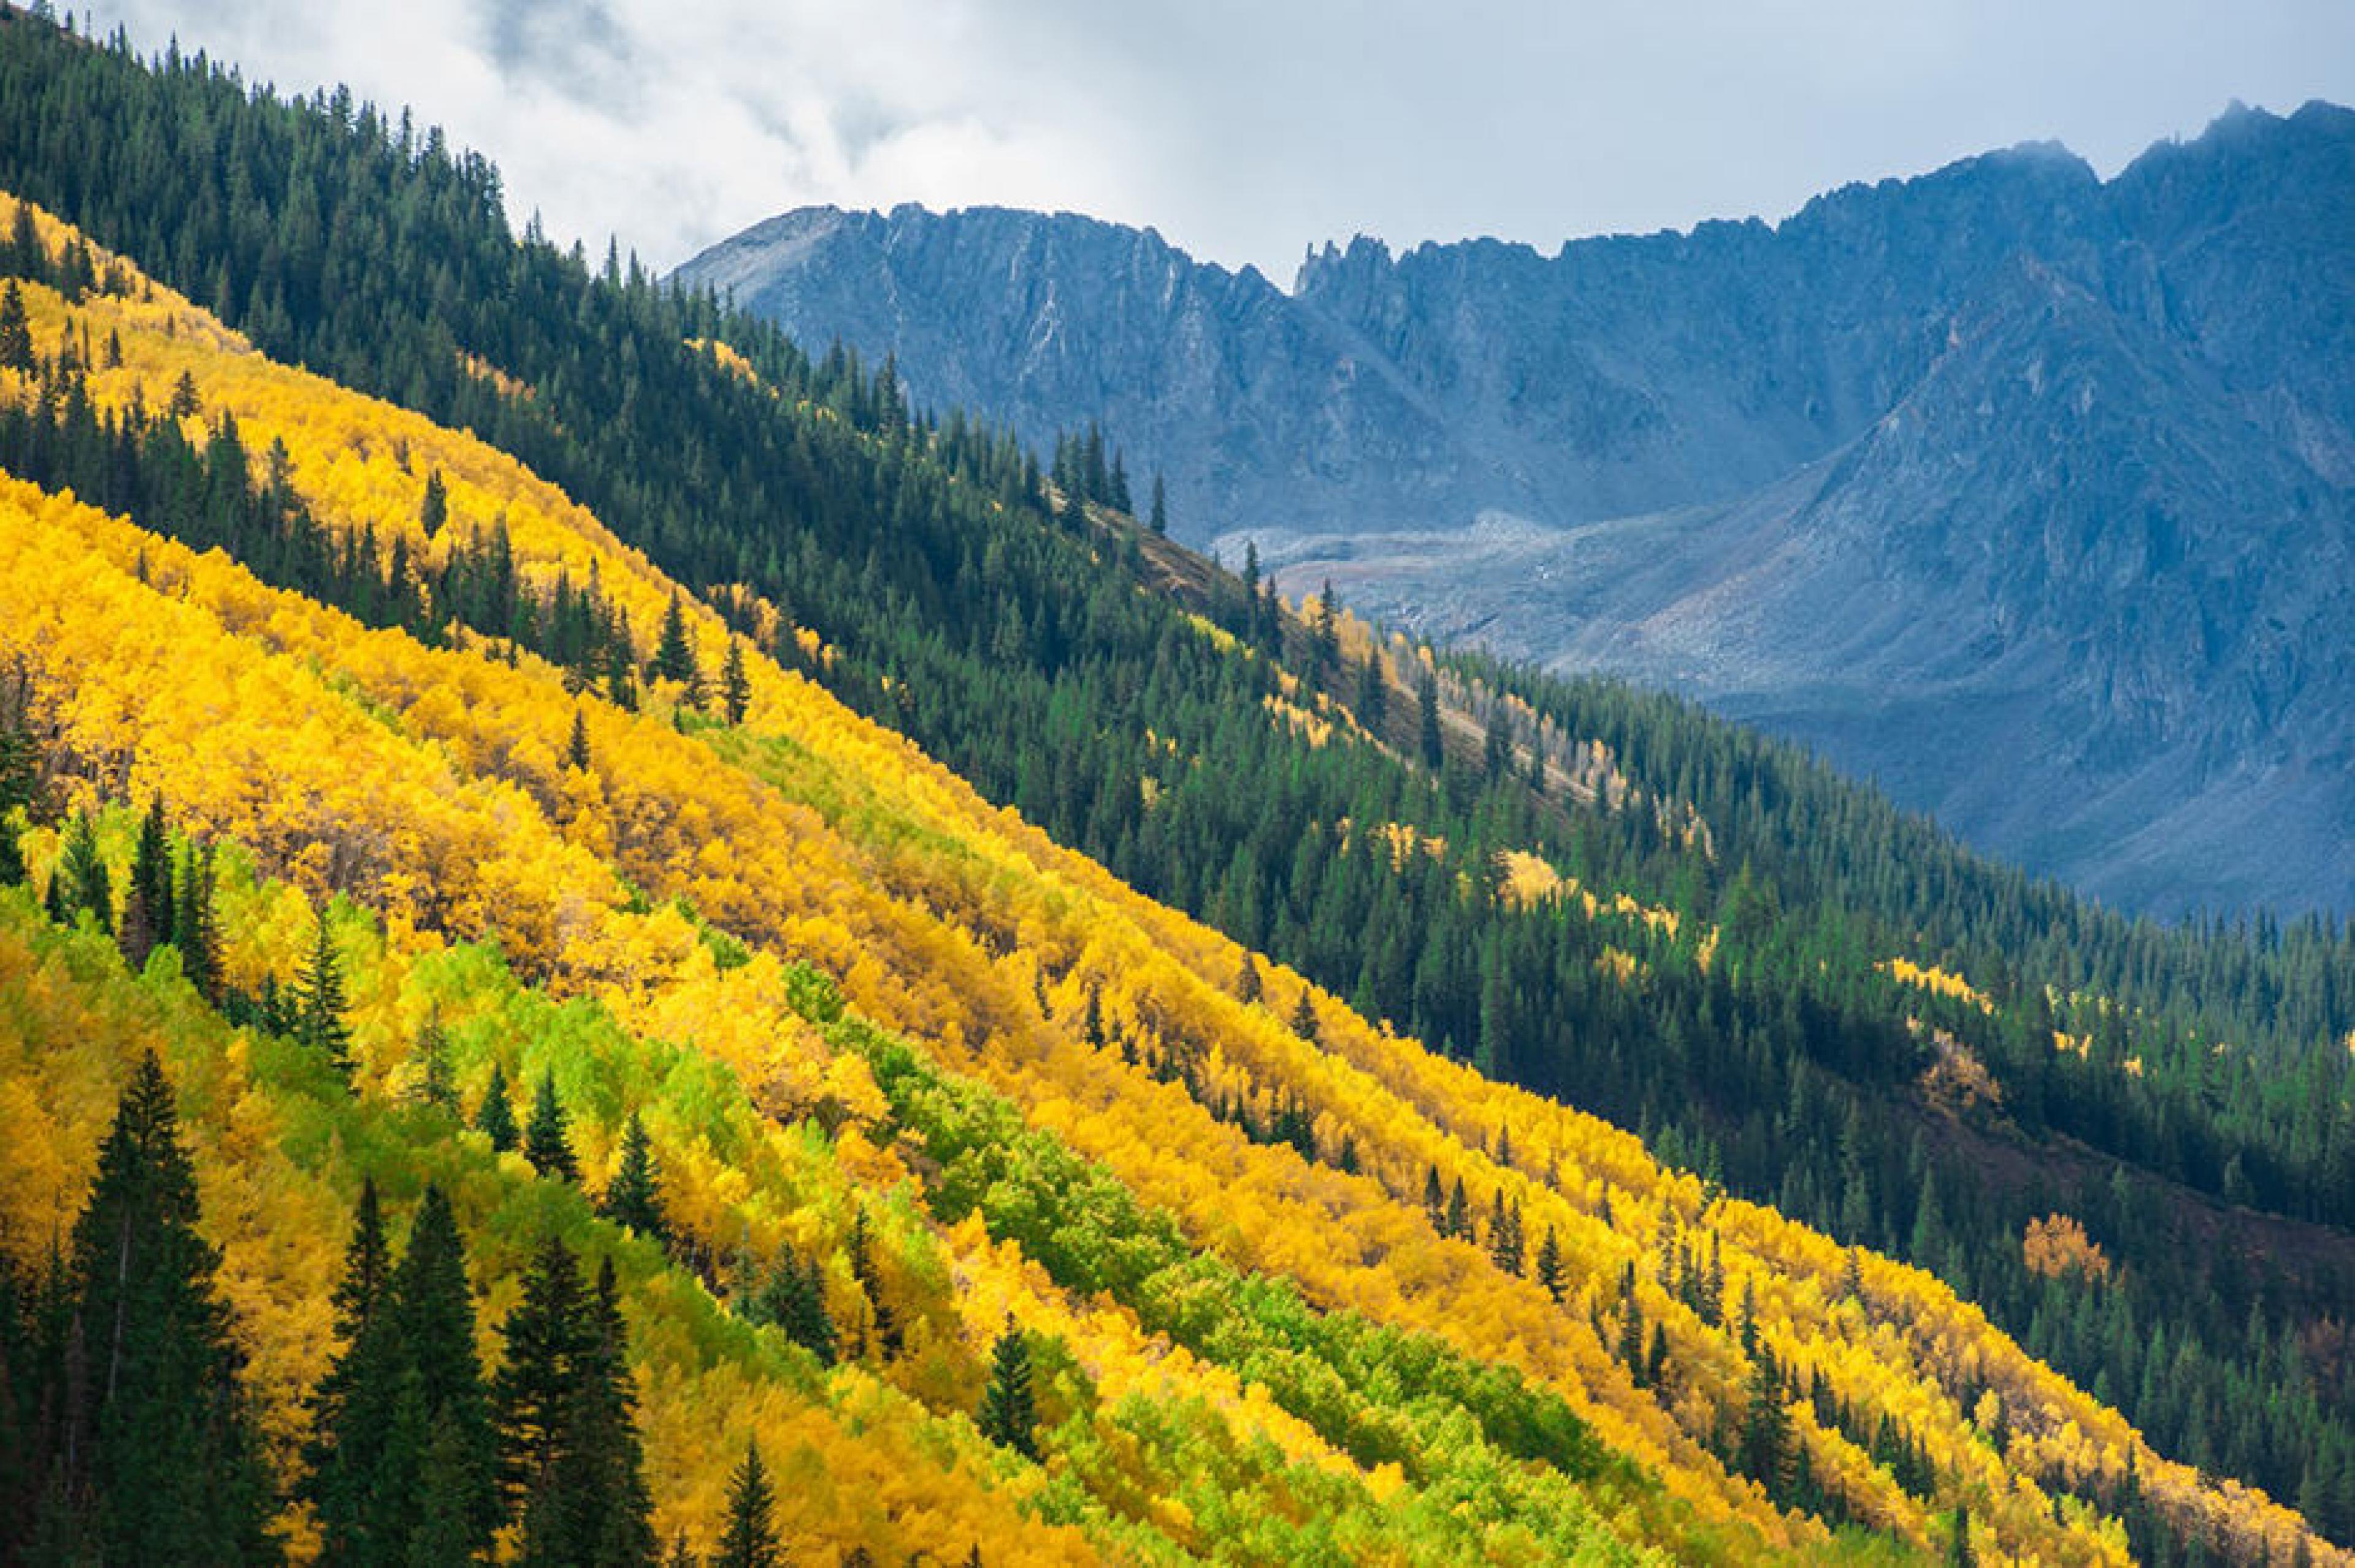 Mountain at Hiking Trails, Aspen, American West 